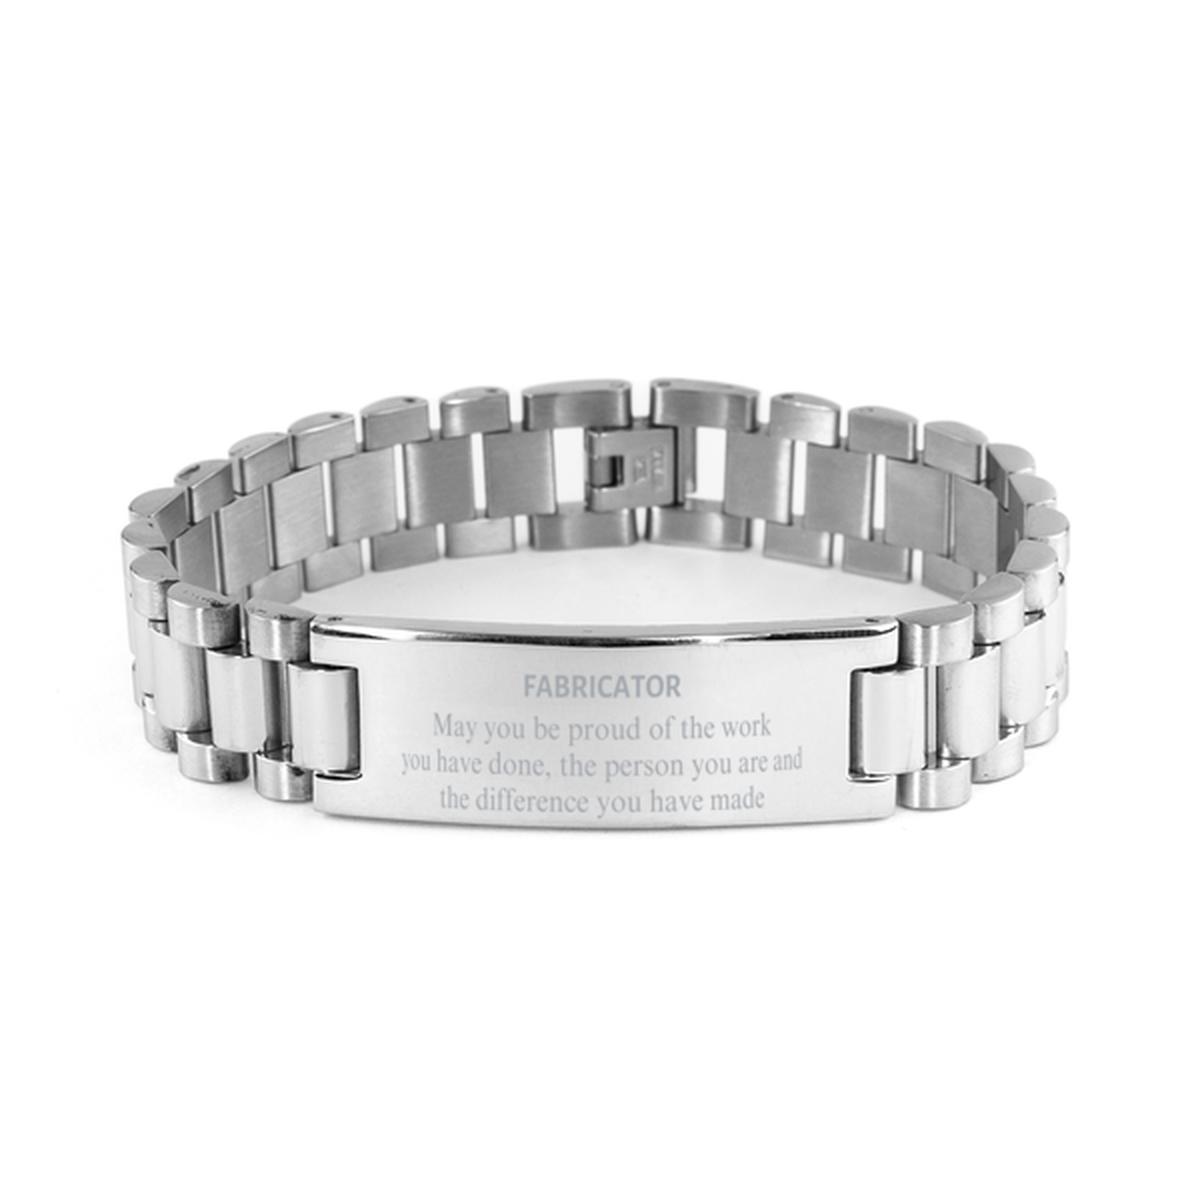 Fabricator May you be proud of the work you have done, Retirement Fabricator Ladder Stainless Steel Bracelet for Colleague Appreciation Gifts Amazing for Fabricator